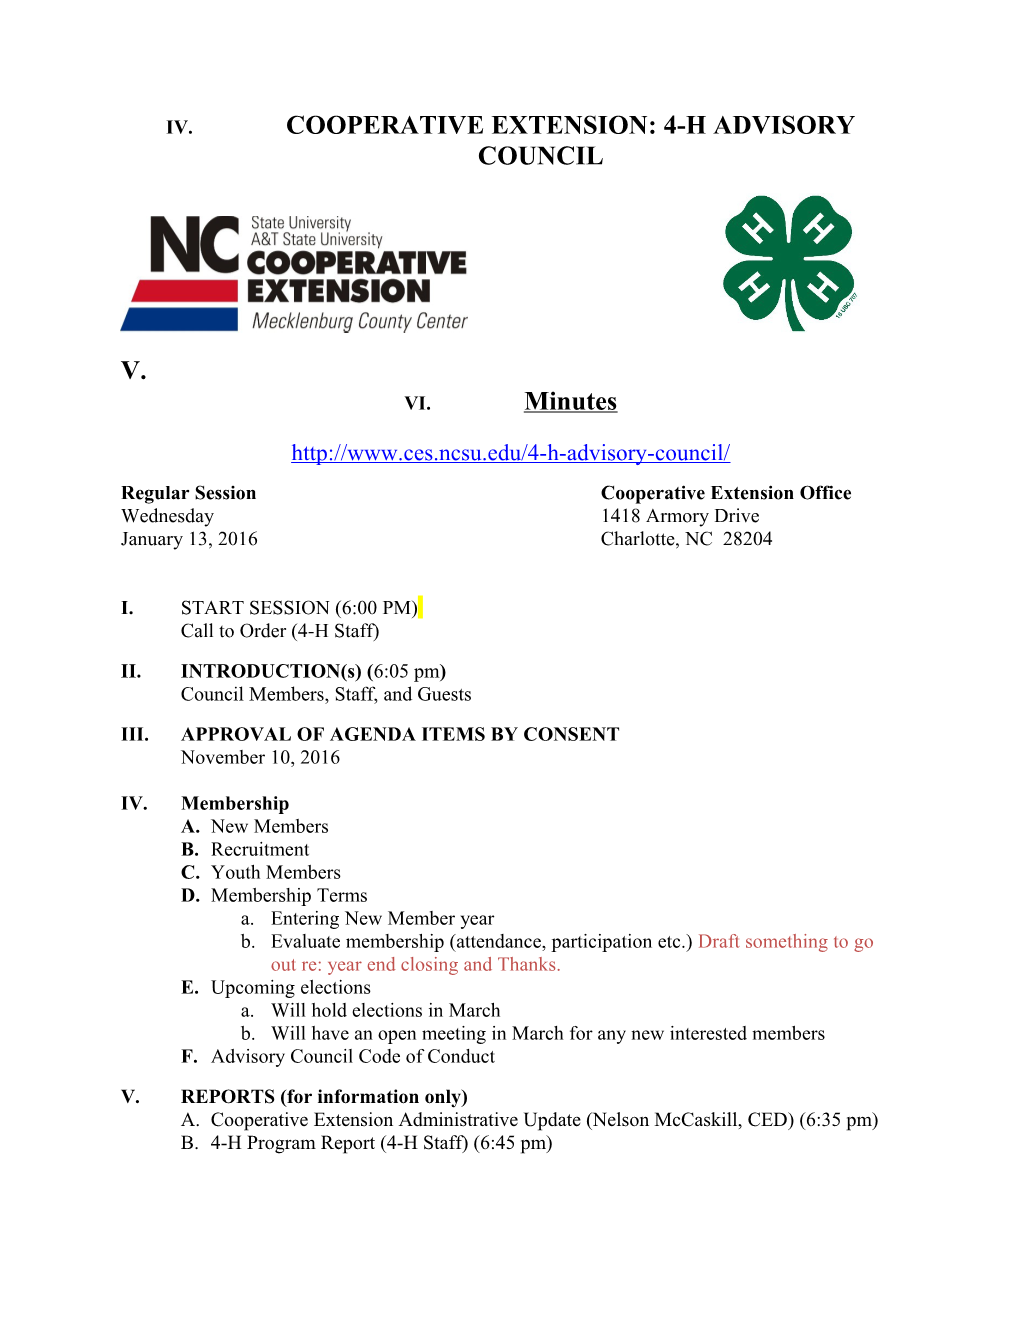 Cooperative Extension: 4-H Advisory Council